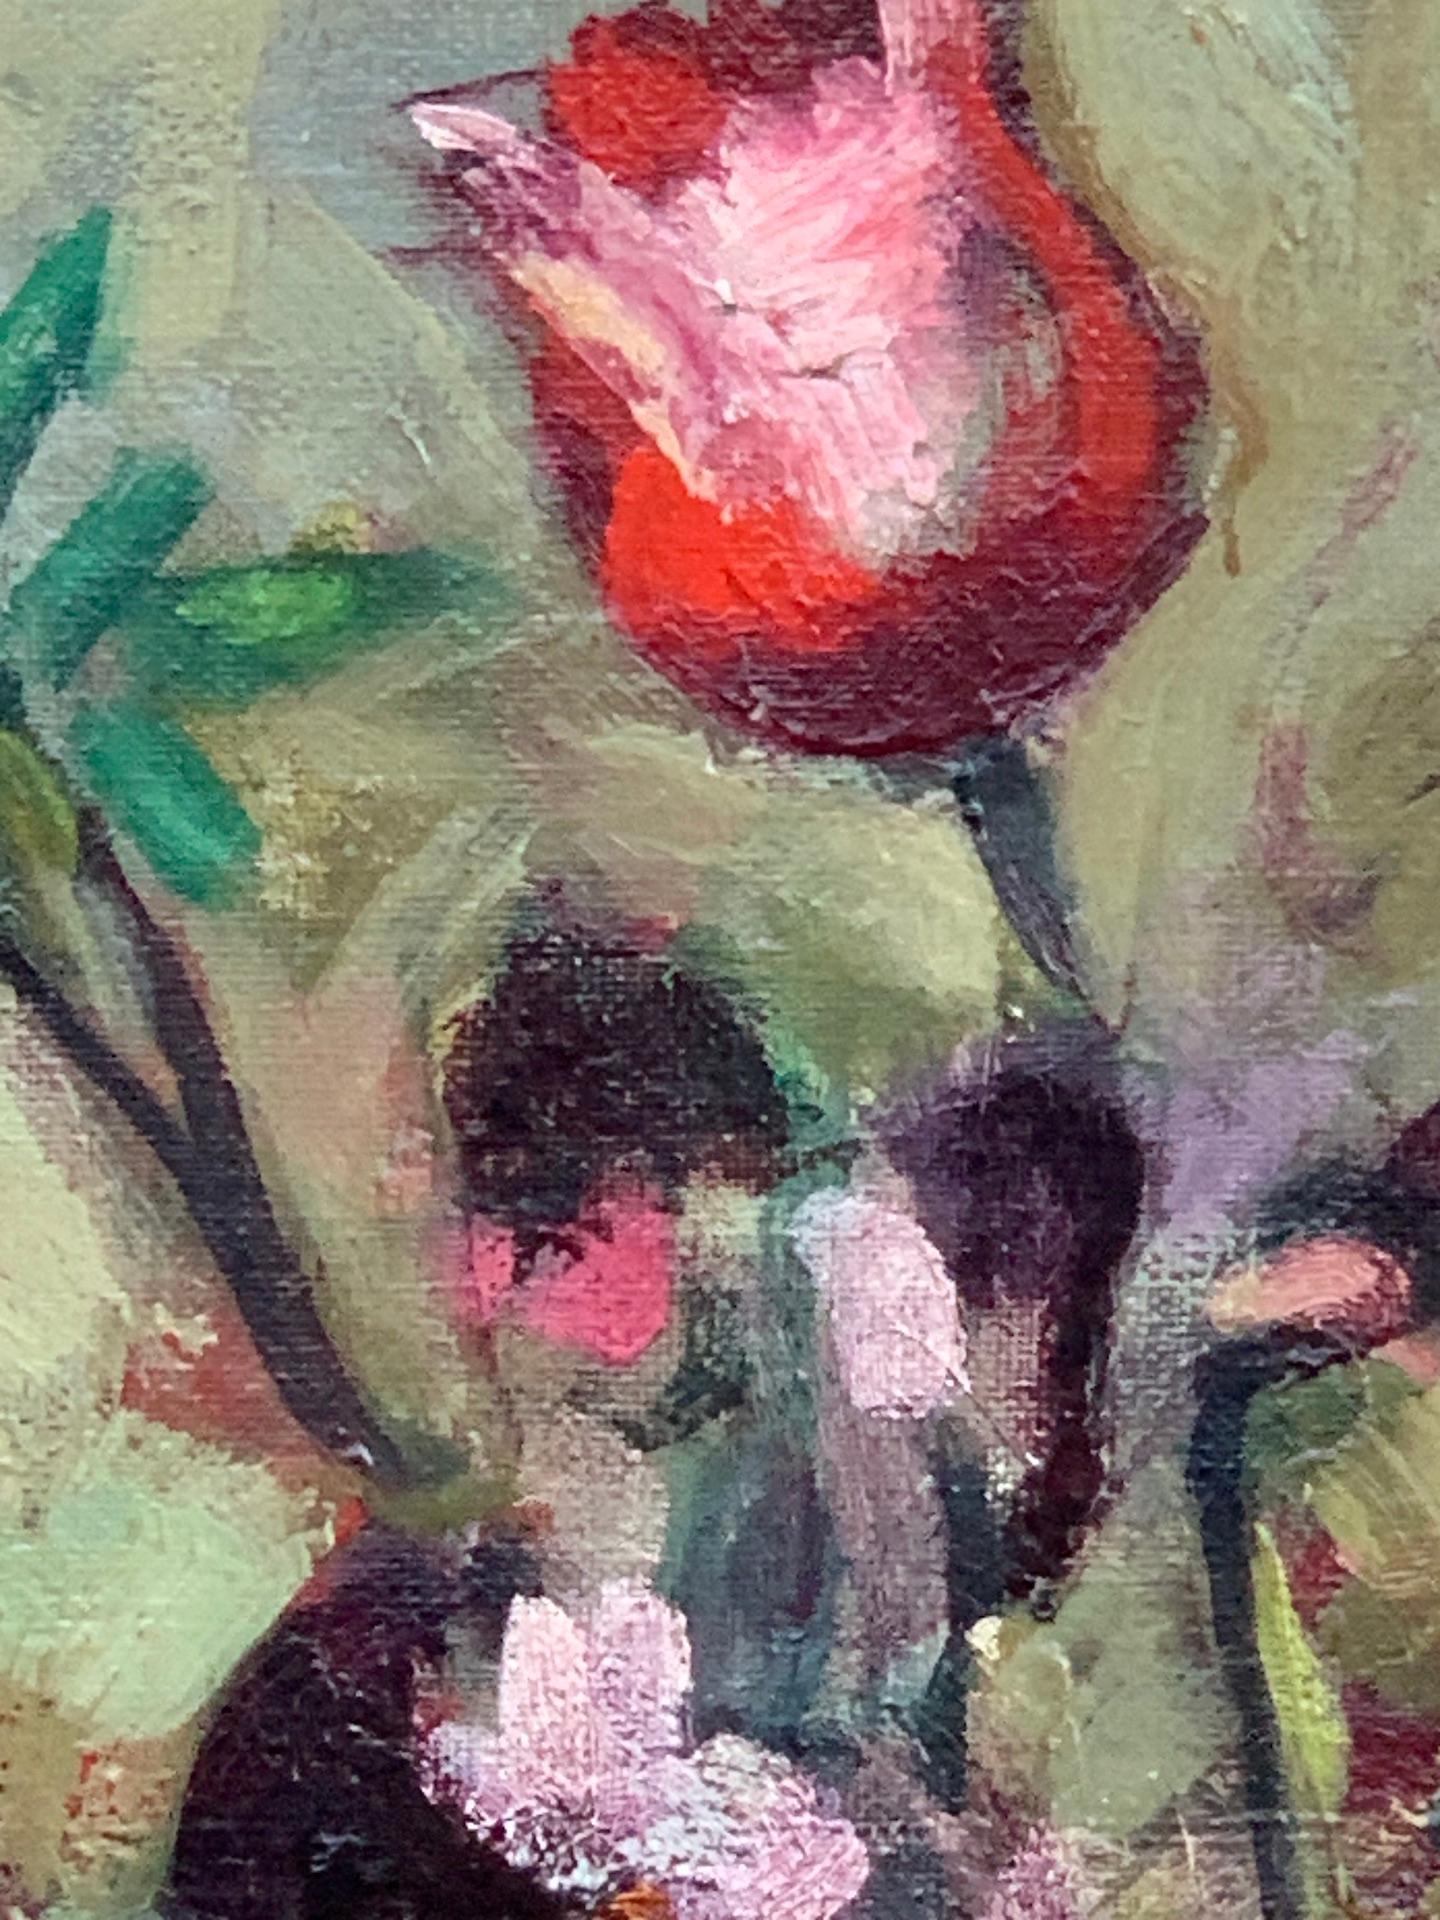 Wonderful English 1930's Still life of Tulips and other red flowers in a vase. 

The 1930s was a period of great artistic experimentation, and many artists were exploring new techniques and styles in their work. Impasto painting, which involves